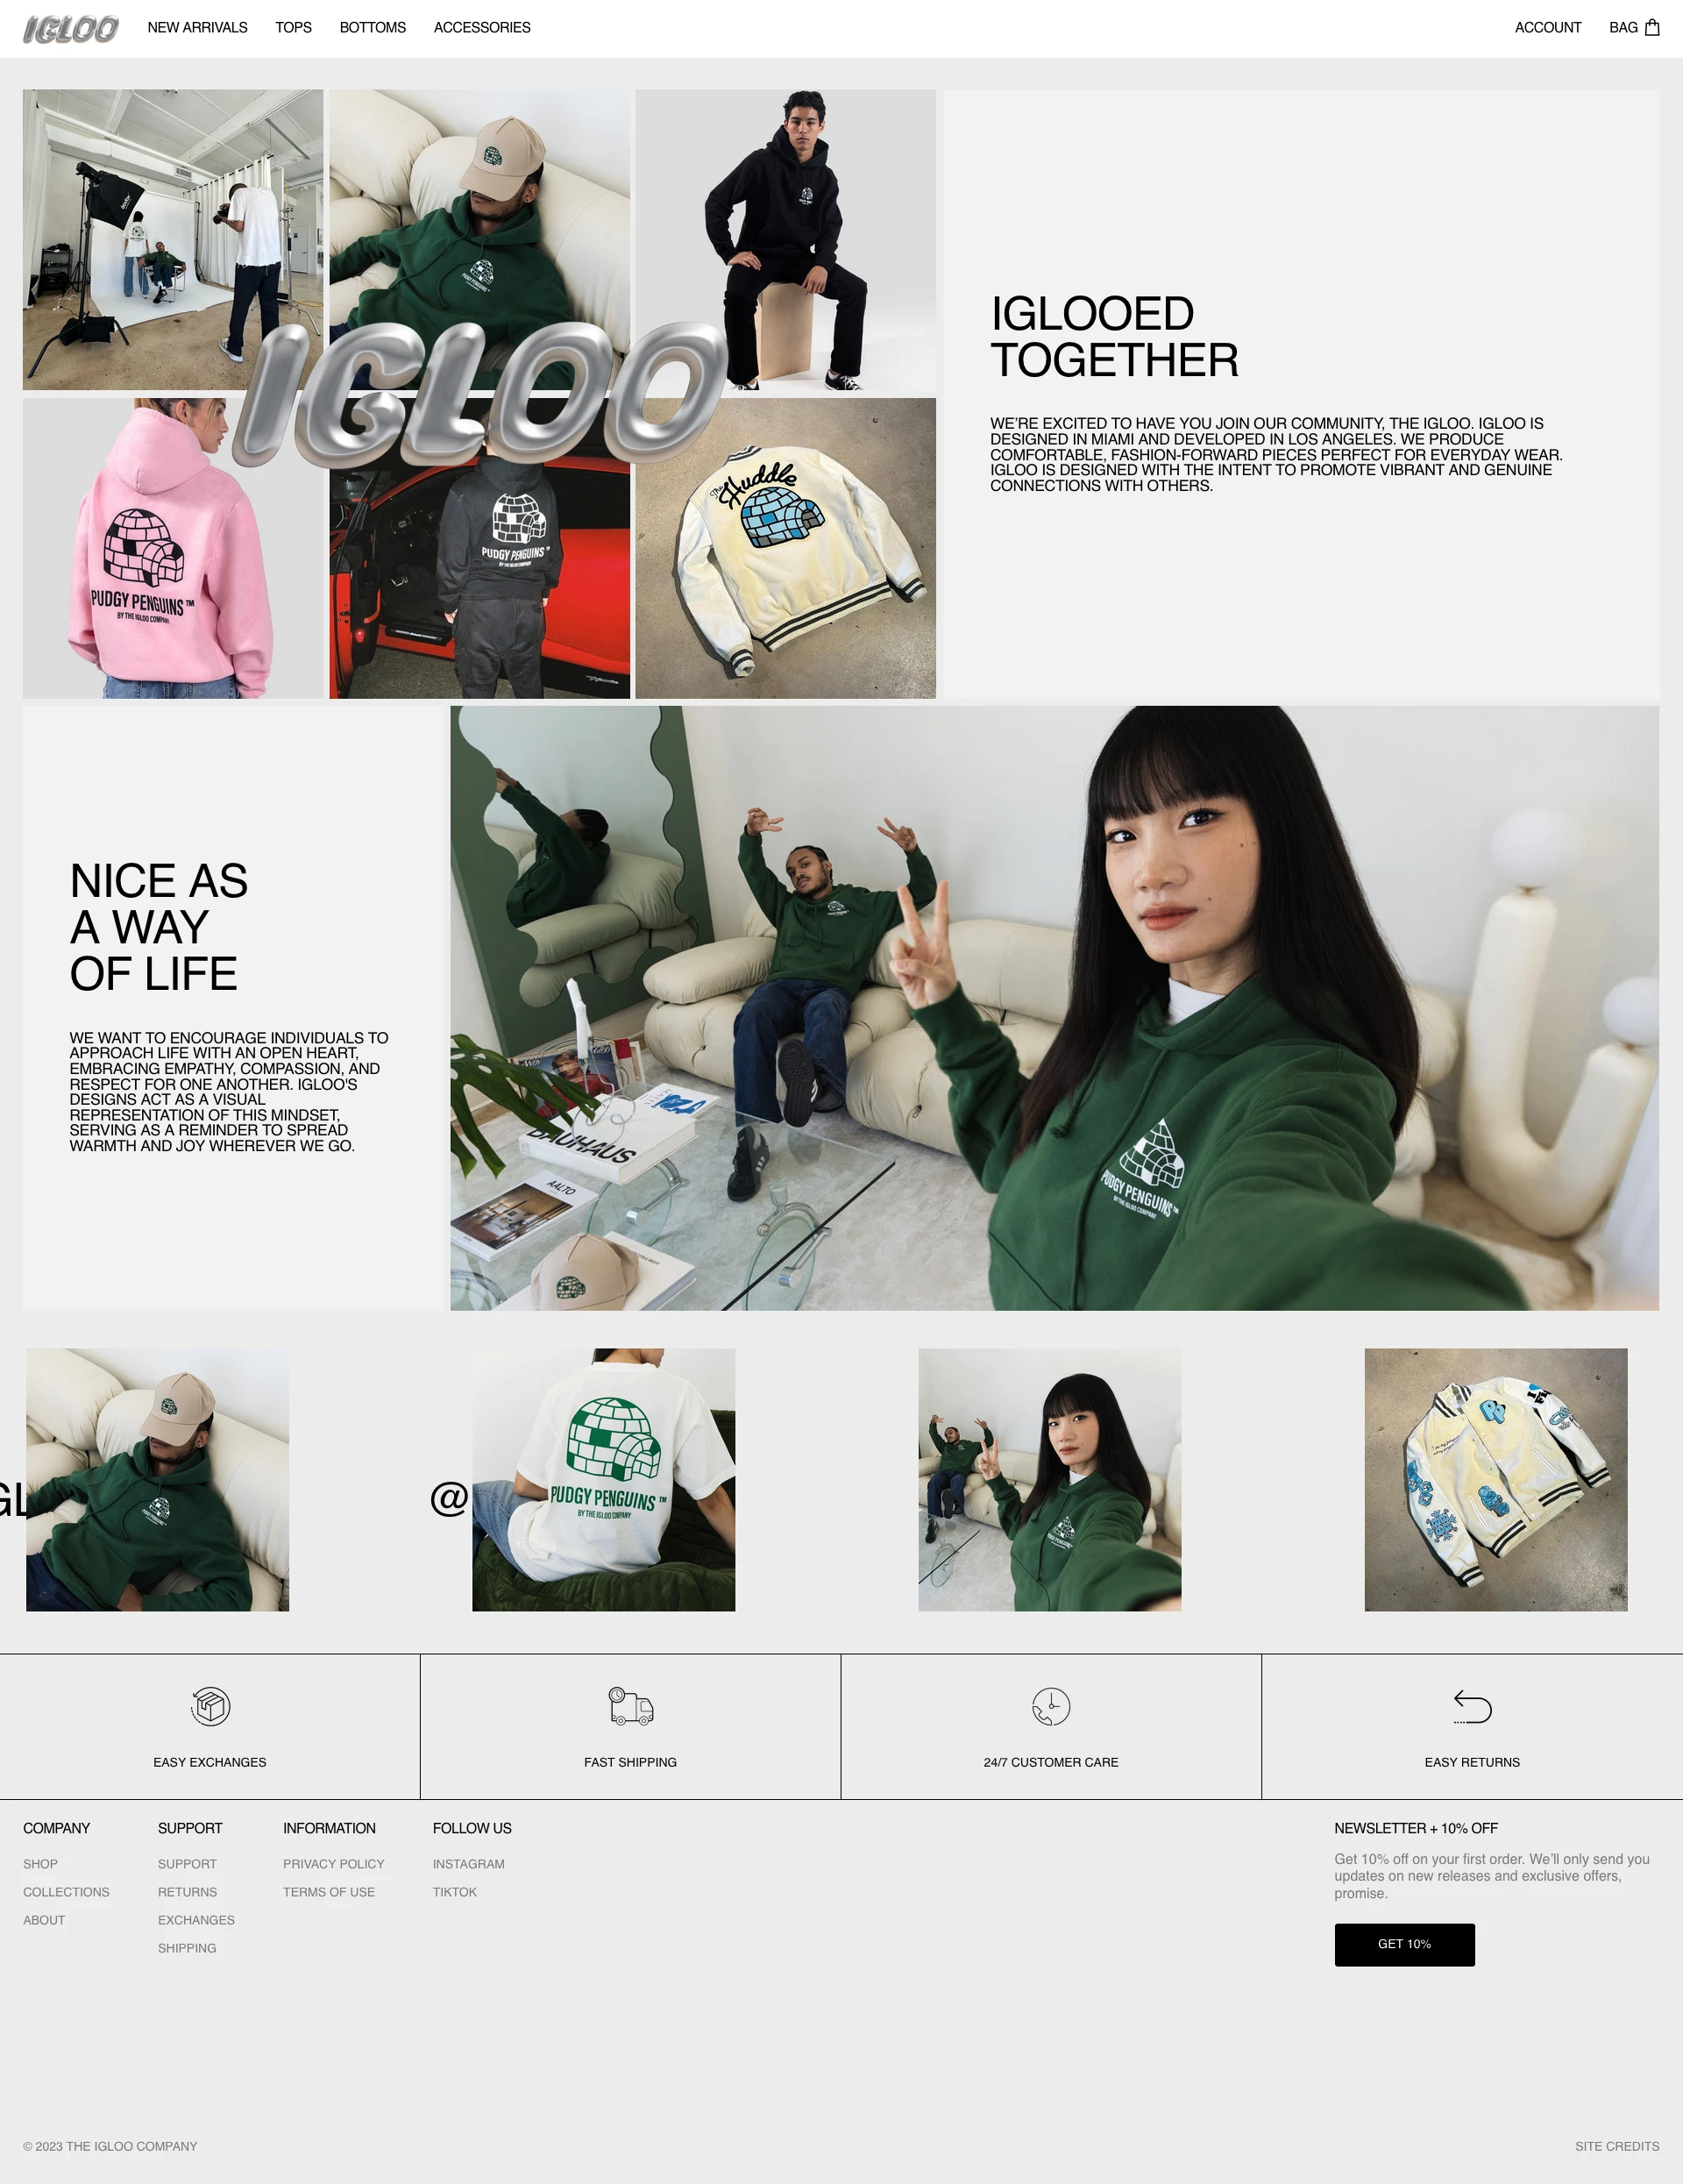 IGLOO Landing Page Example: Igloo is designed in Miami and developed in Los Angeles. We produce comfortable, fashion-forward pieces perfect for everyday wear. Igloo is designed with the intent to promote vibrant and genuine connections with others.